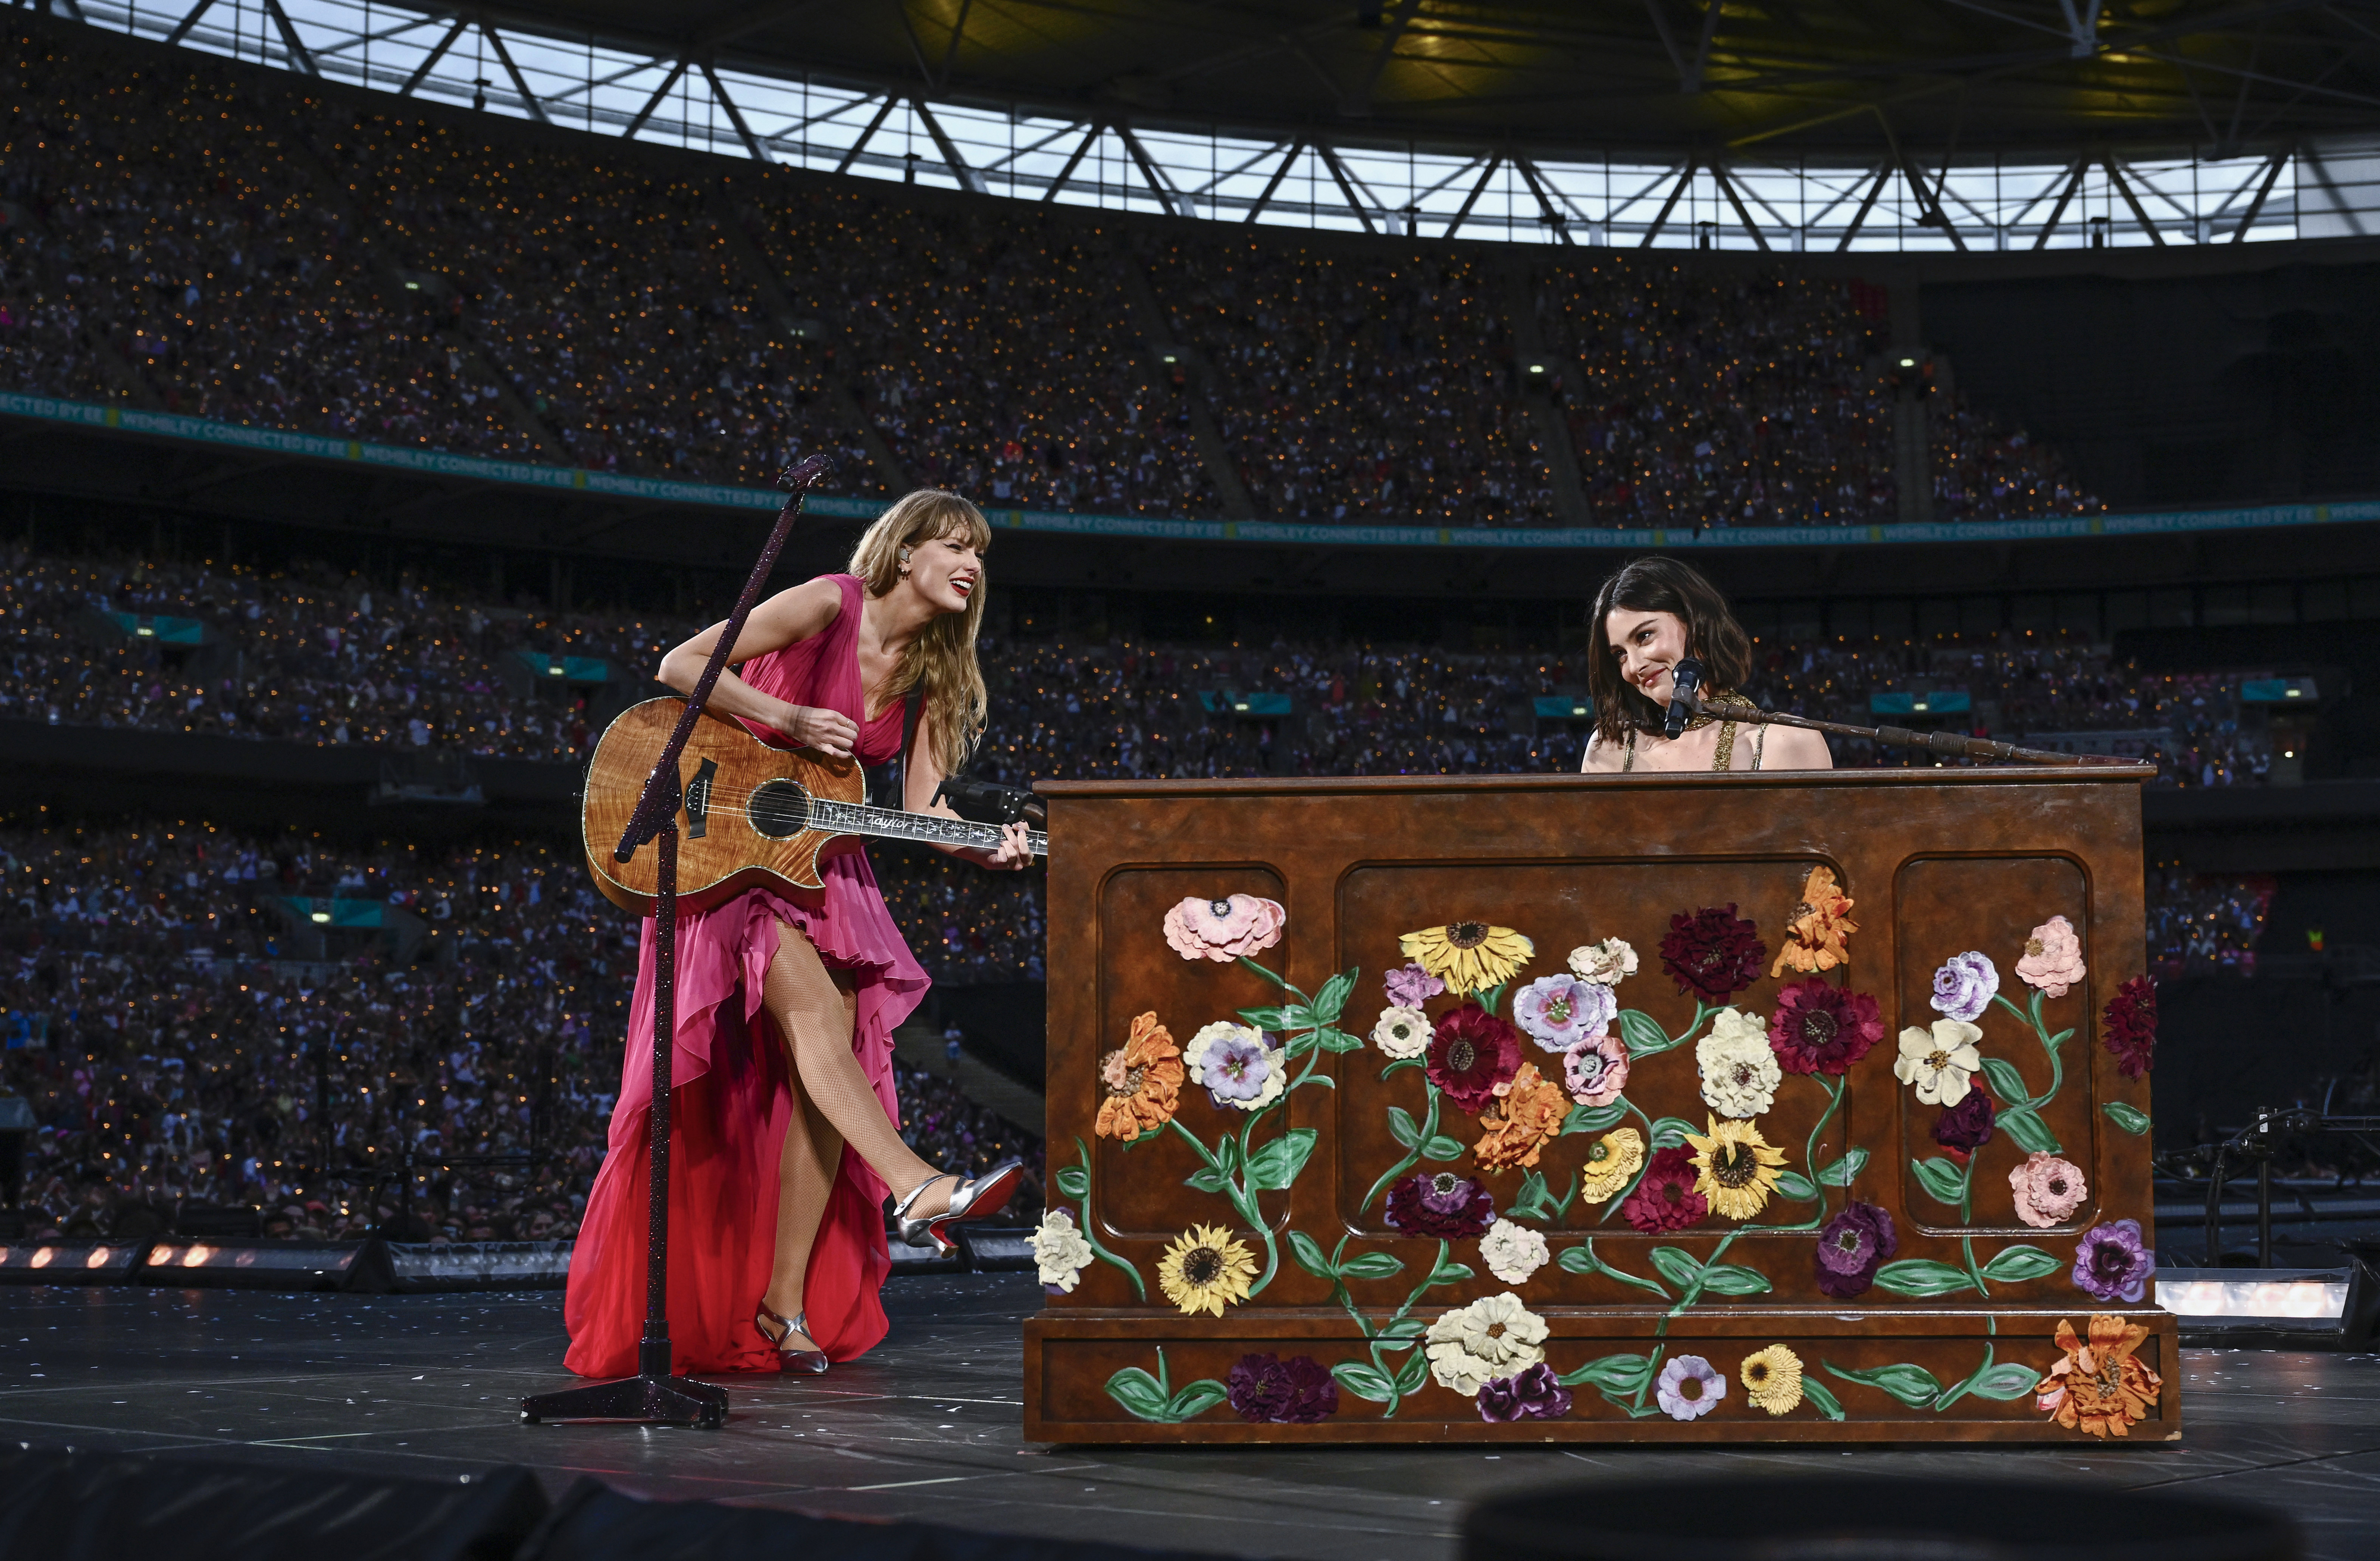 Taylor Swift in a red dress playing guitar and joined by Grace Abrams at a flower-decorated piano on stage during a concert at a large stadium